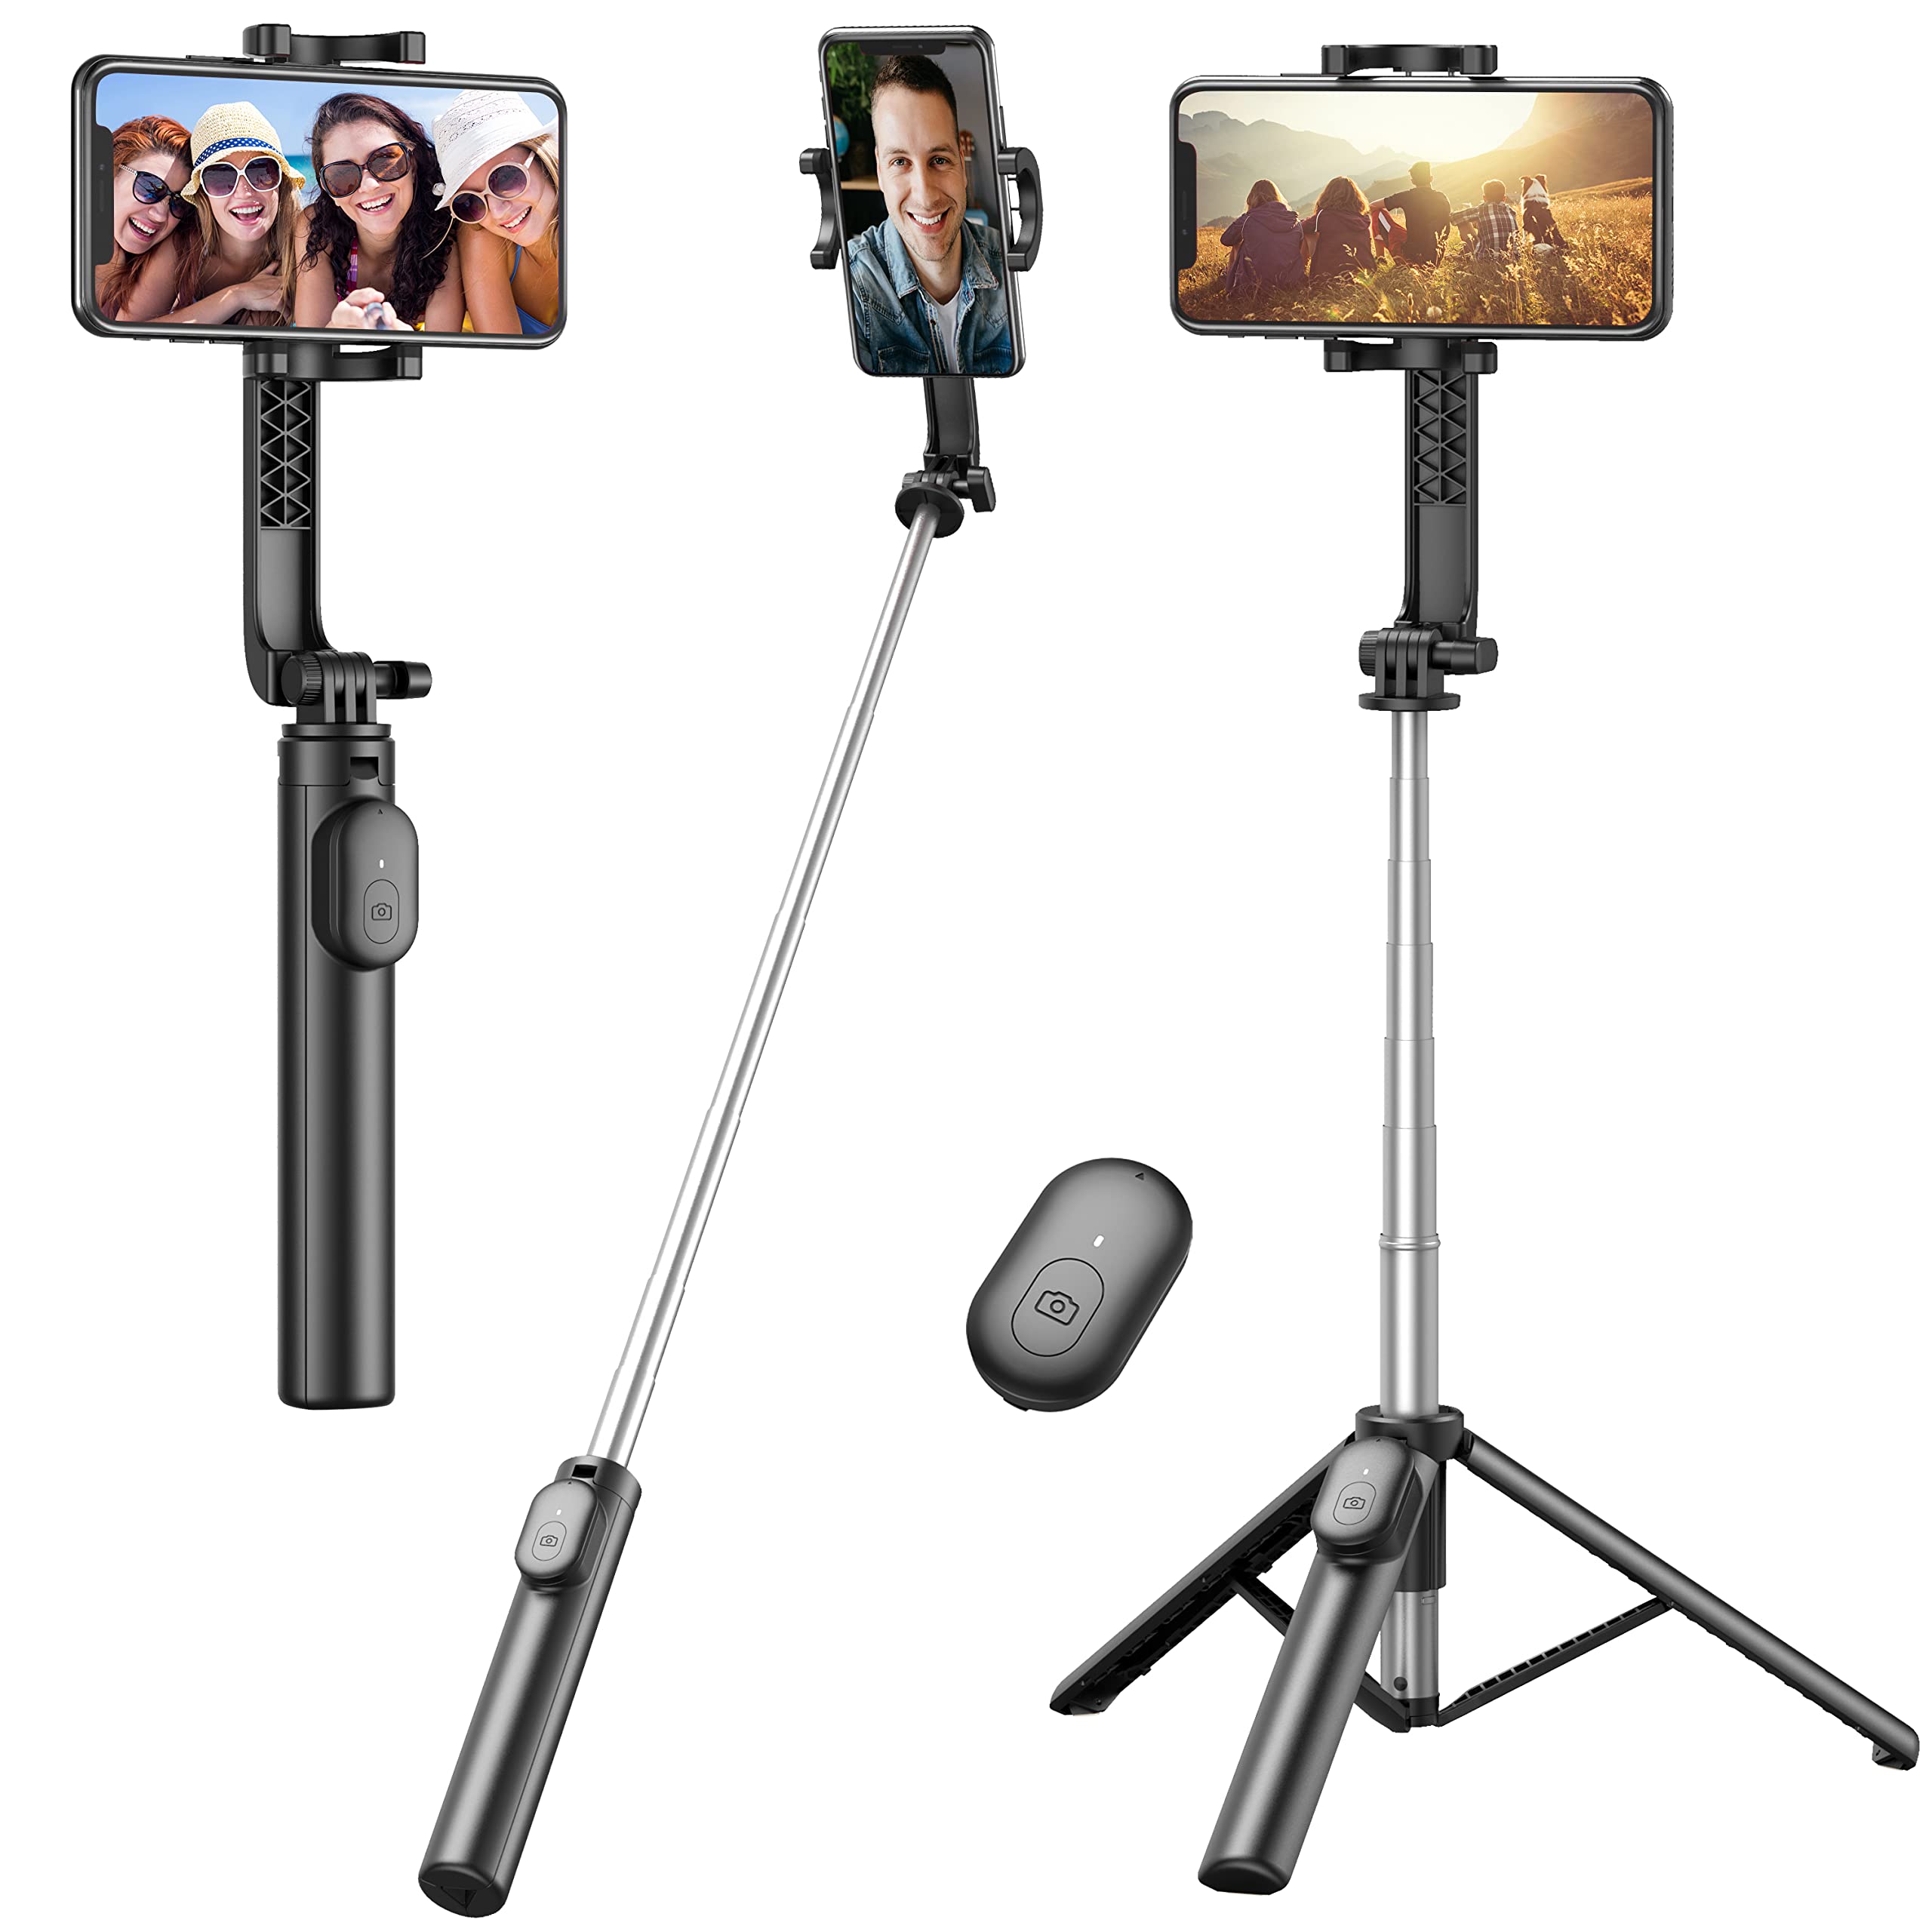 Selfie Stick, Extendable Selfie Stick Tripod with Wireless Remote and Phone Holder, Portable Phone Tripod Stand for Group Selfie/Live Streaming/Video Recording Compatible with iPhone, Android Phones